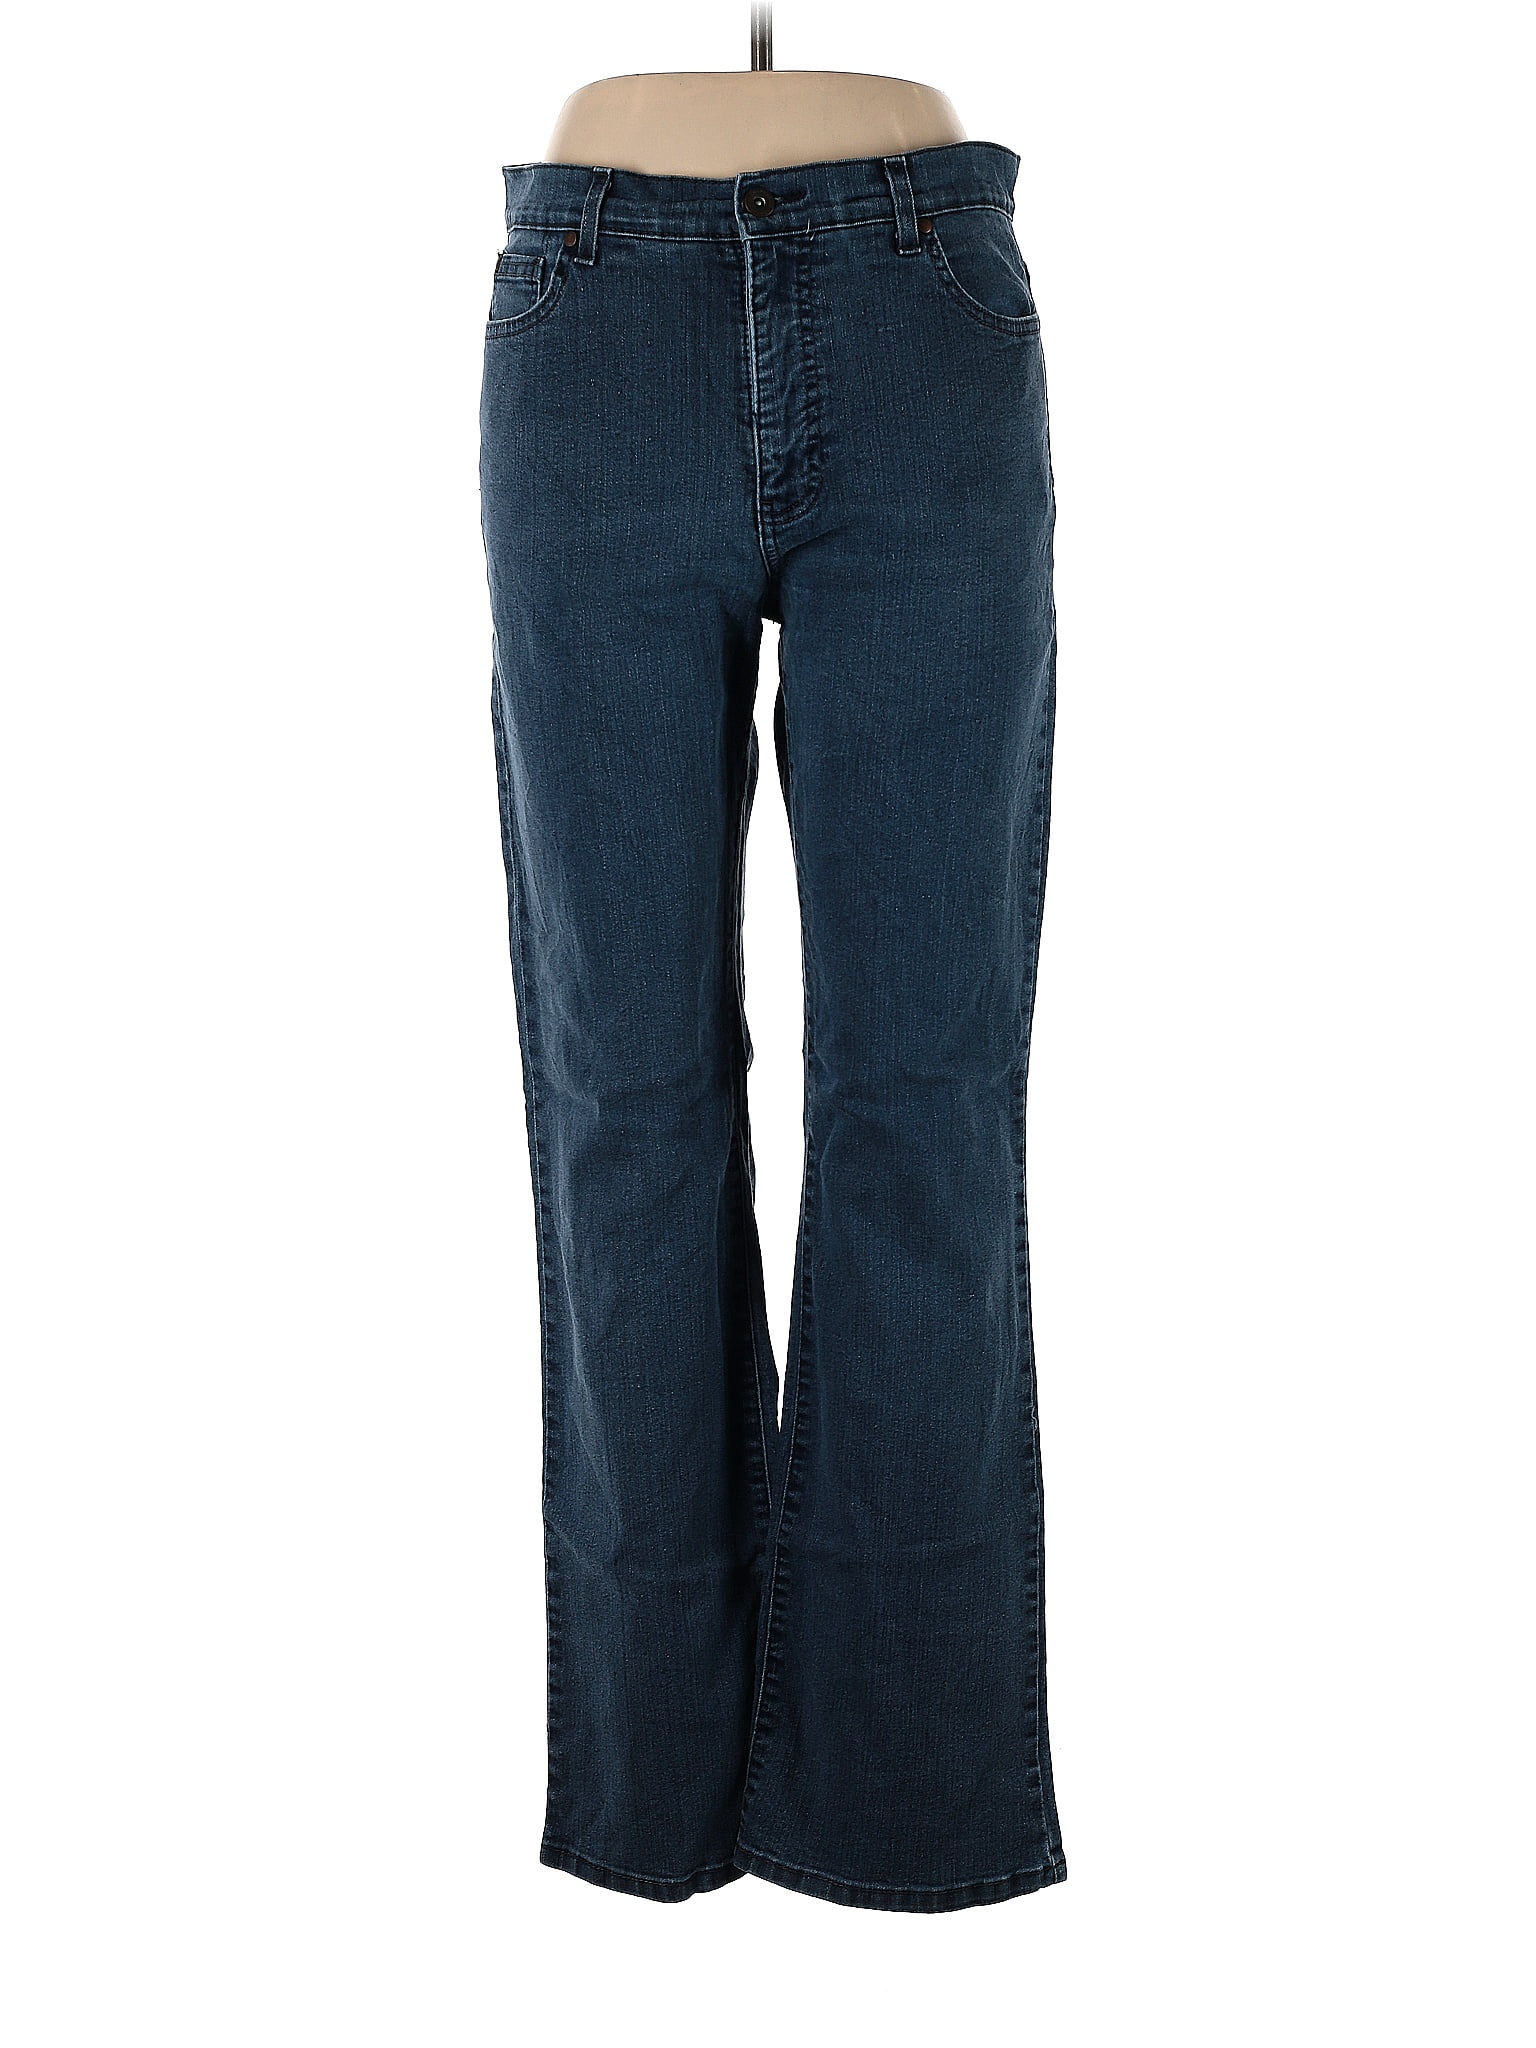 Charter Club Solid Blue Jeans Size 12 - 64% off